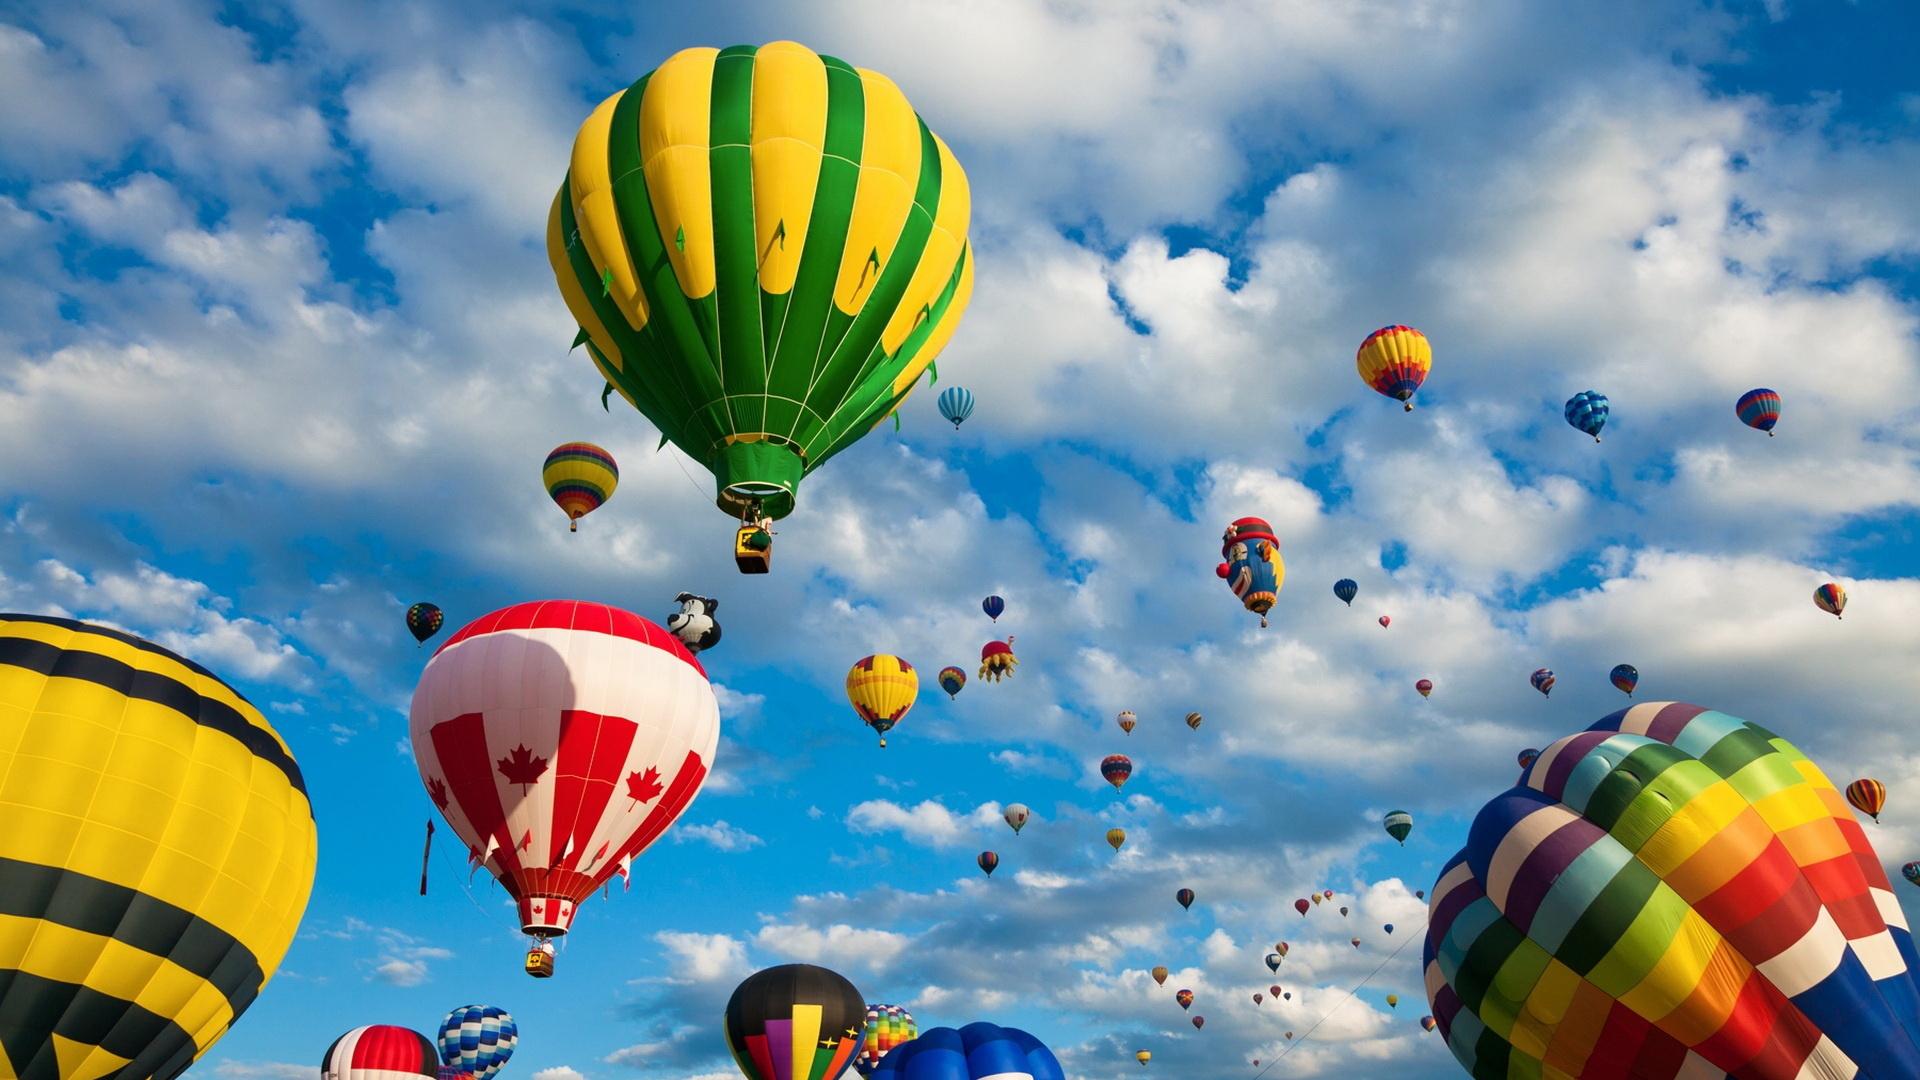 Country Hot Air Balloons - High Definition, High Resolution HD Wallpapers :  High Definition, High Resolution HD Wallpapers